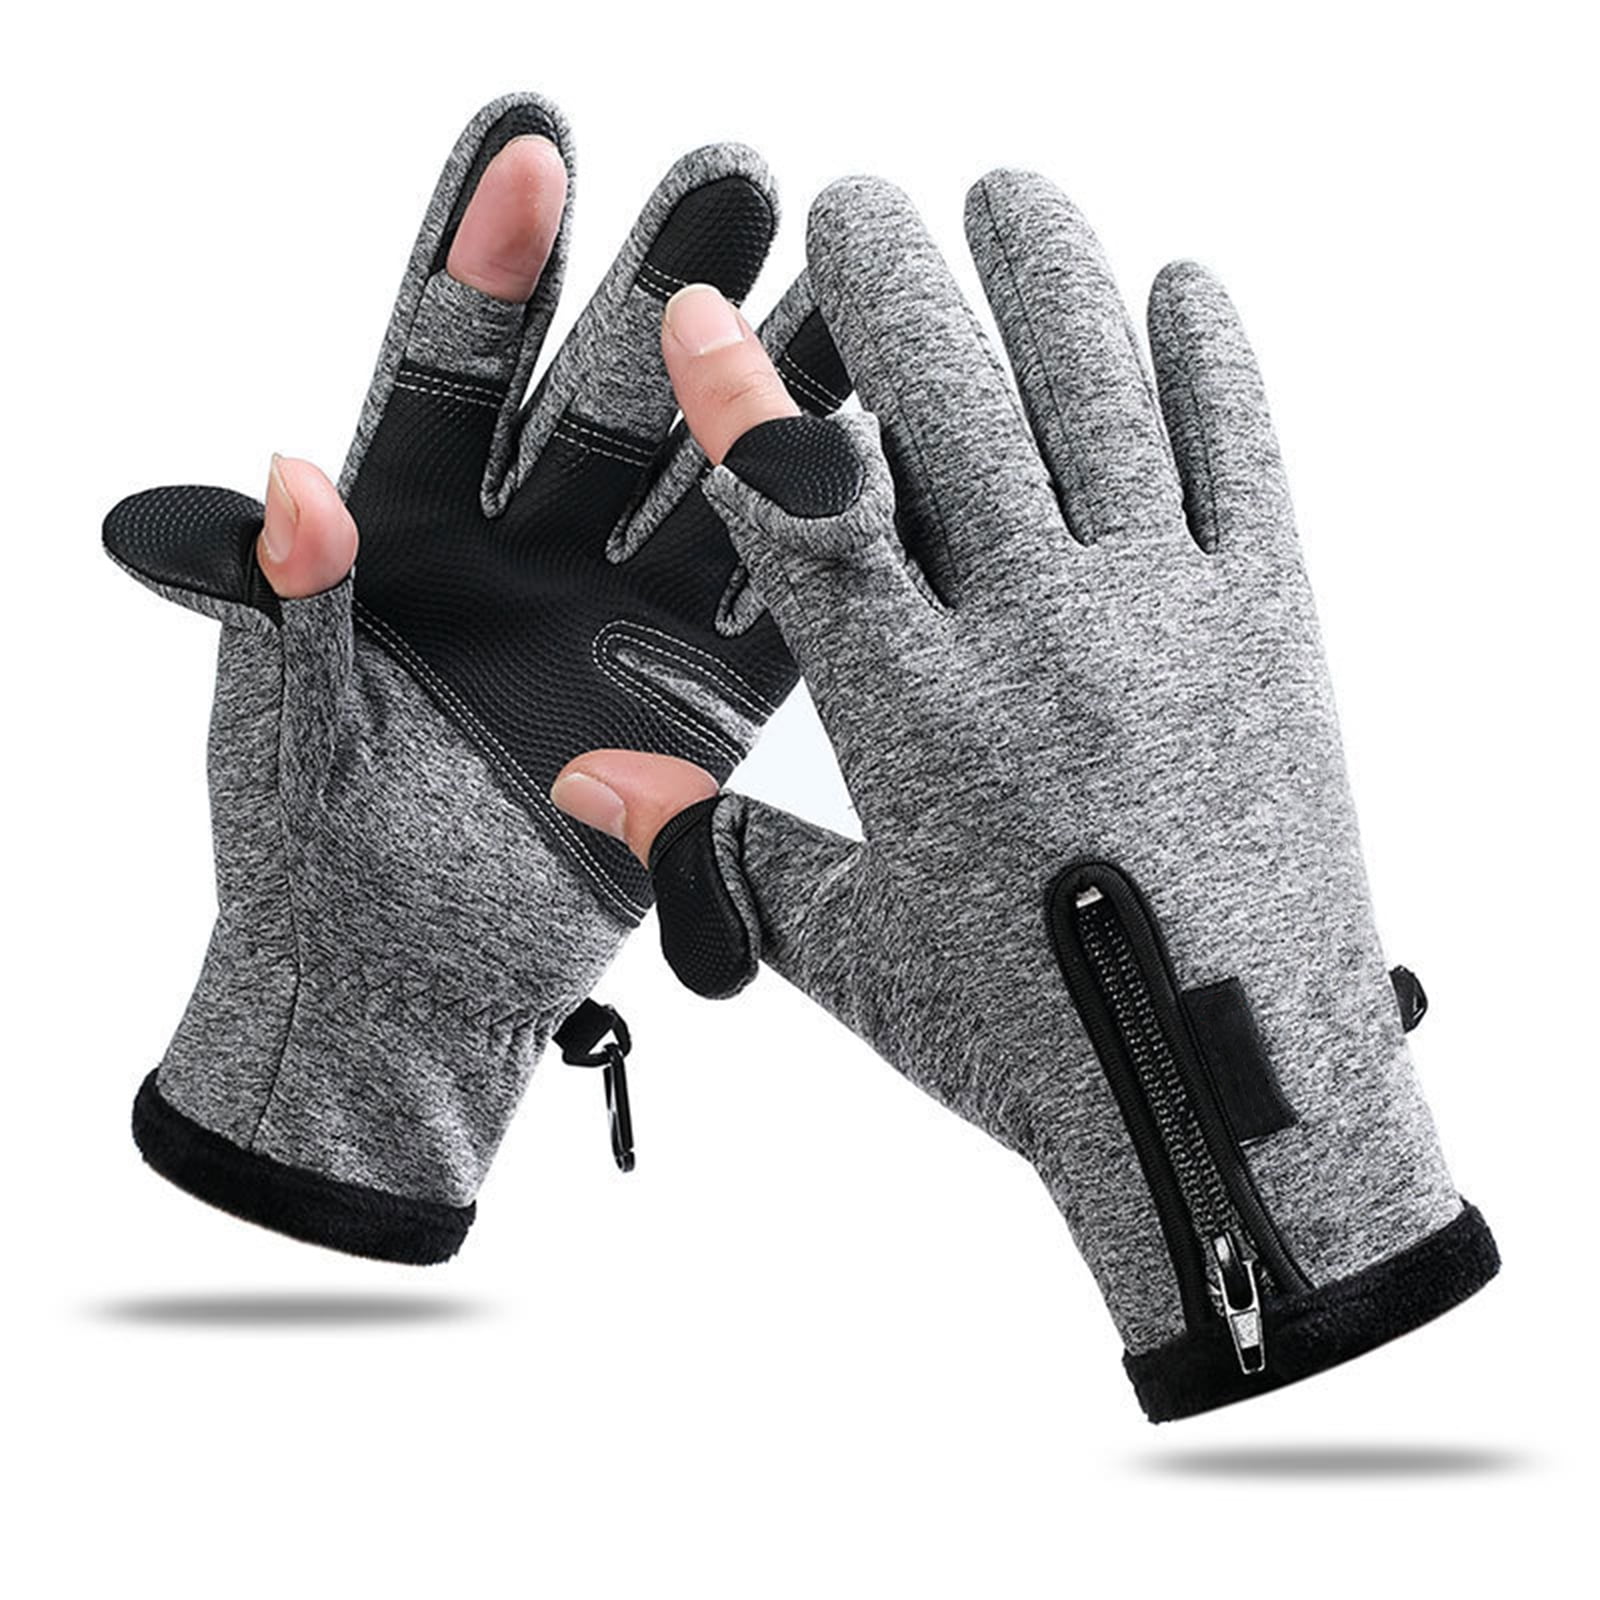 2pcs Hands Protection Gear Palm Safety Guard Glove for Ice Skating Outdoors 